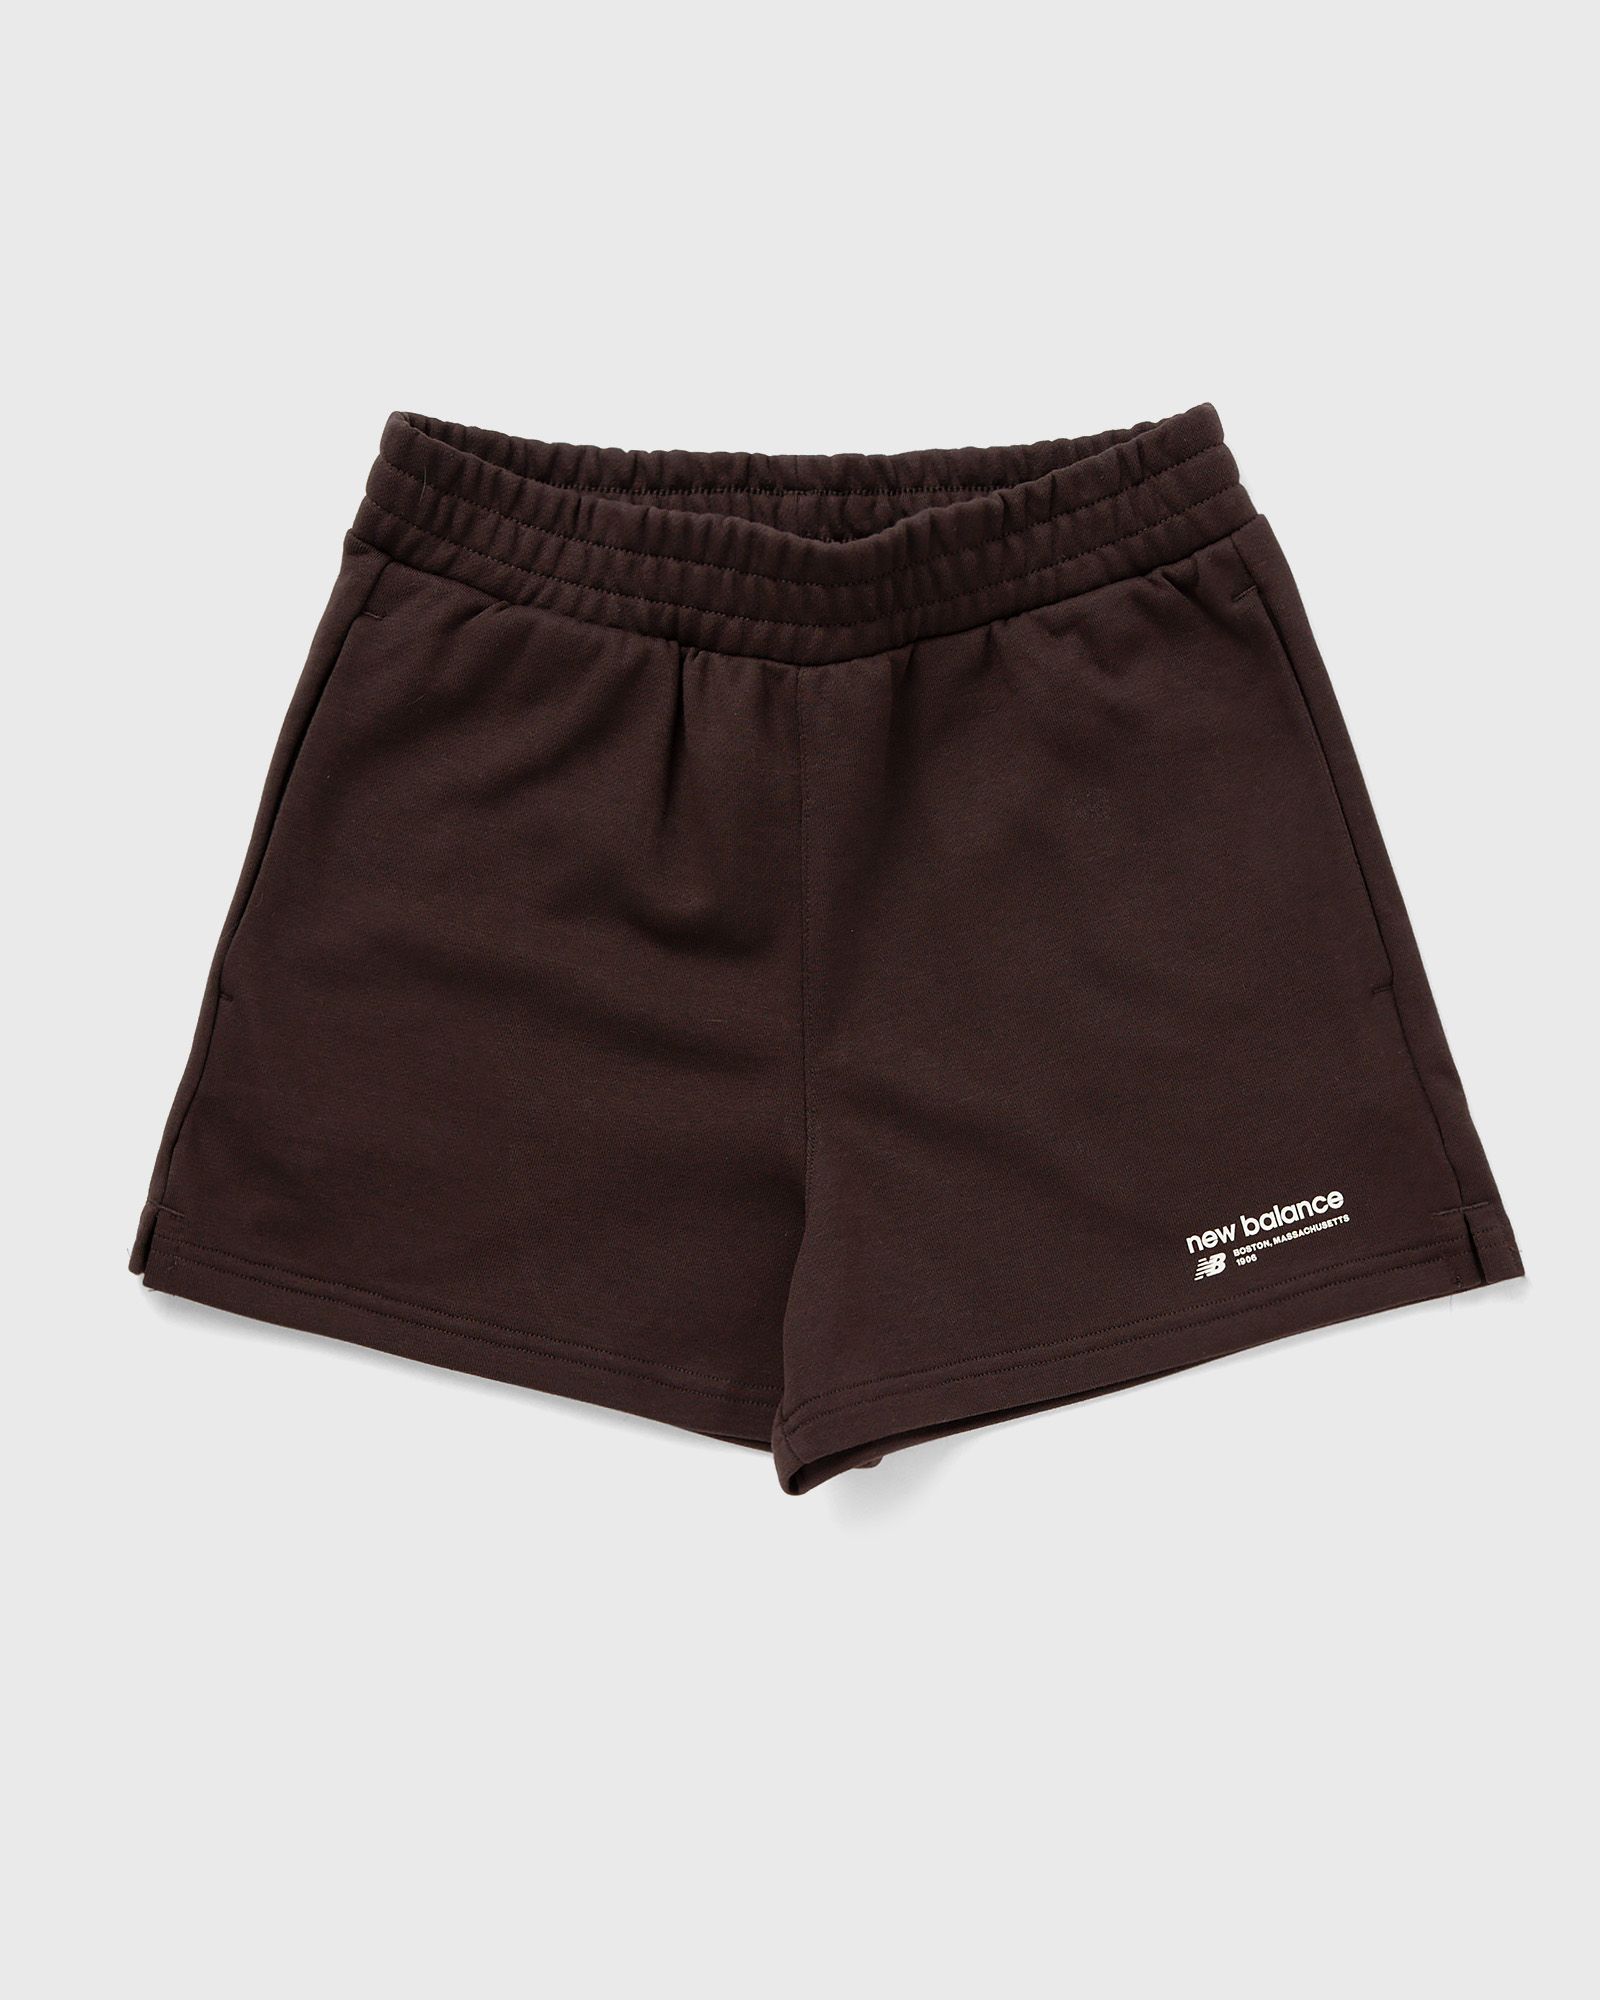 New Balance - linear heritage french terry short women casual shorts brown in größe:l